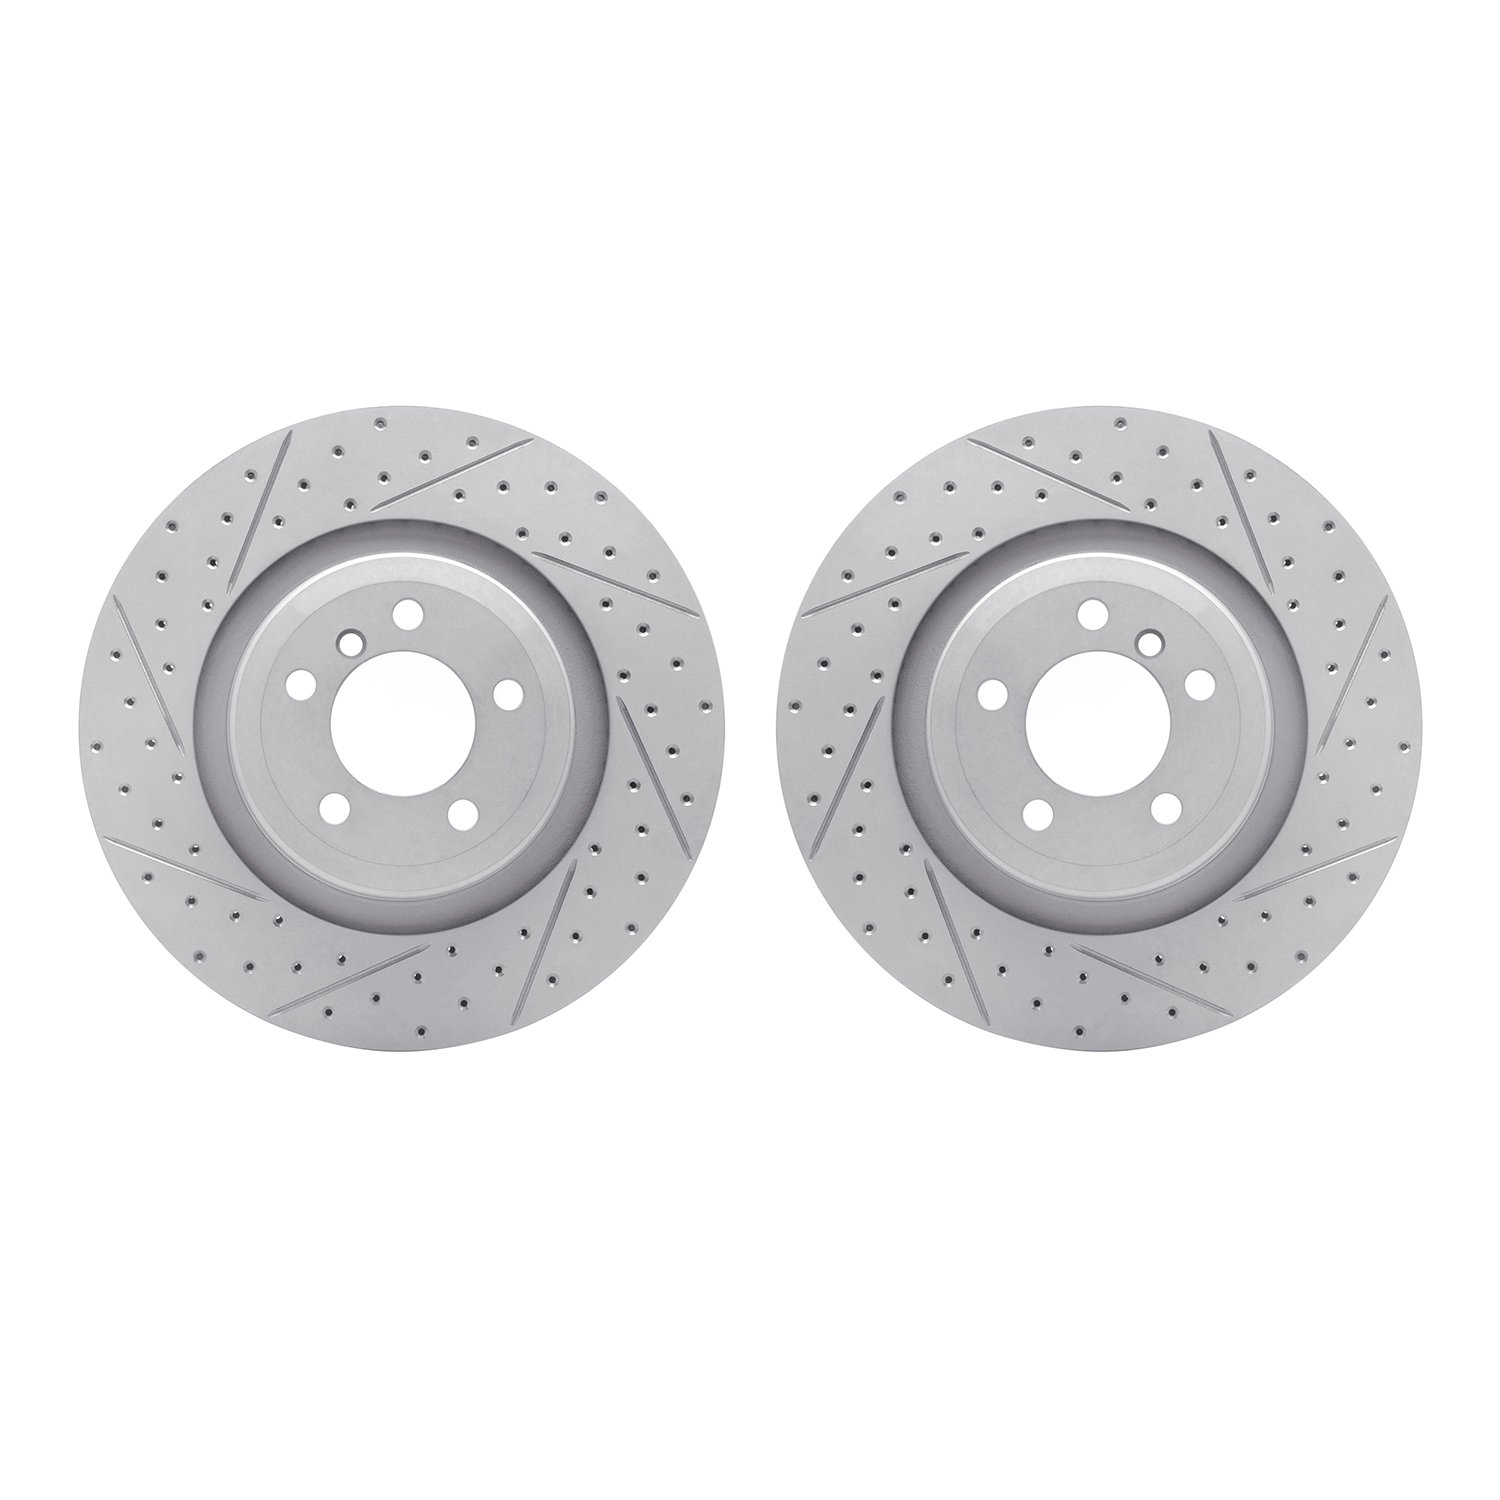 2002-31085 Geoperformance Drilled/Slotted Brake Rotors, 2007-2008 BMW, Position: Rear